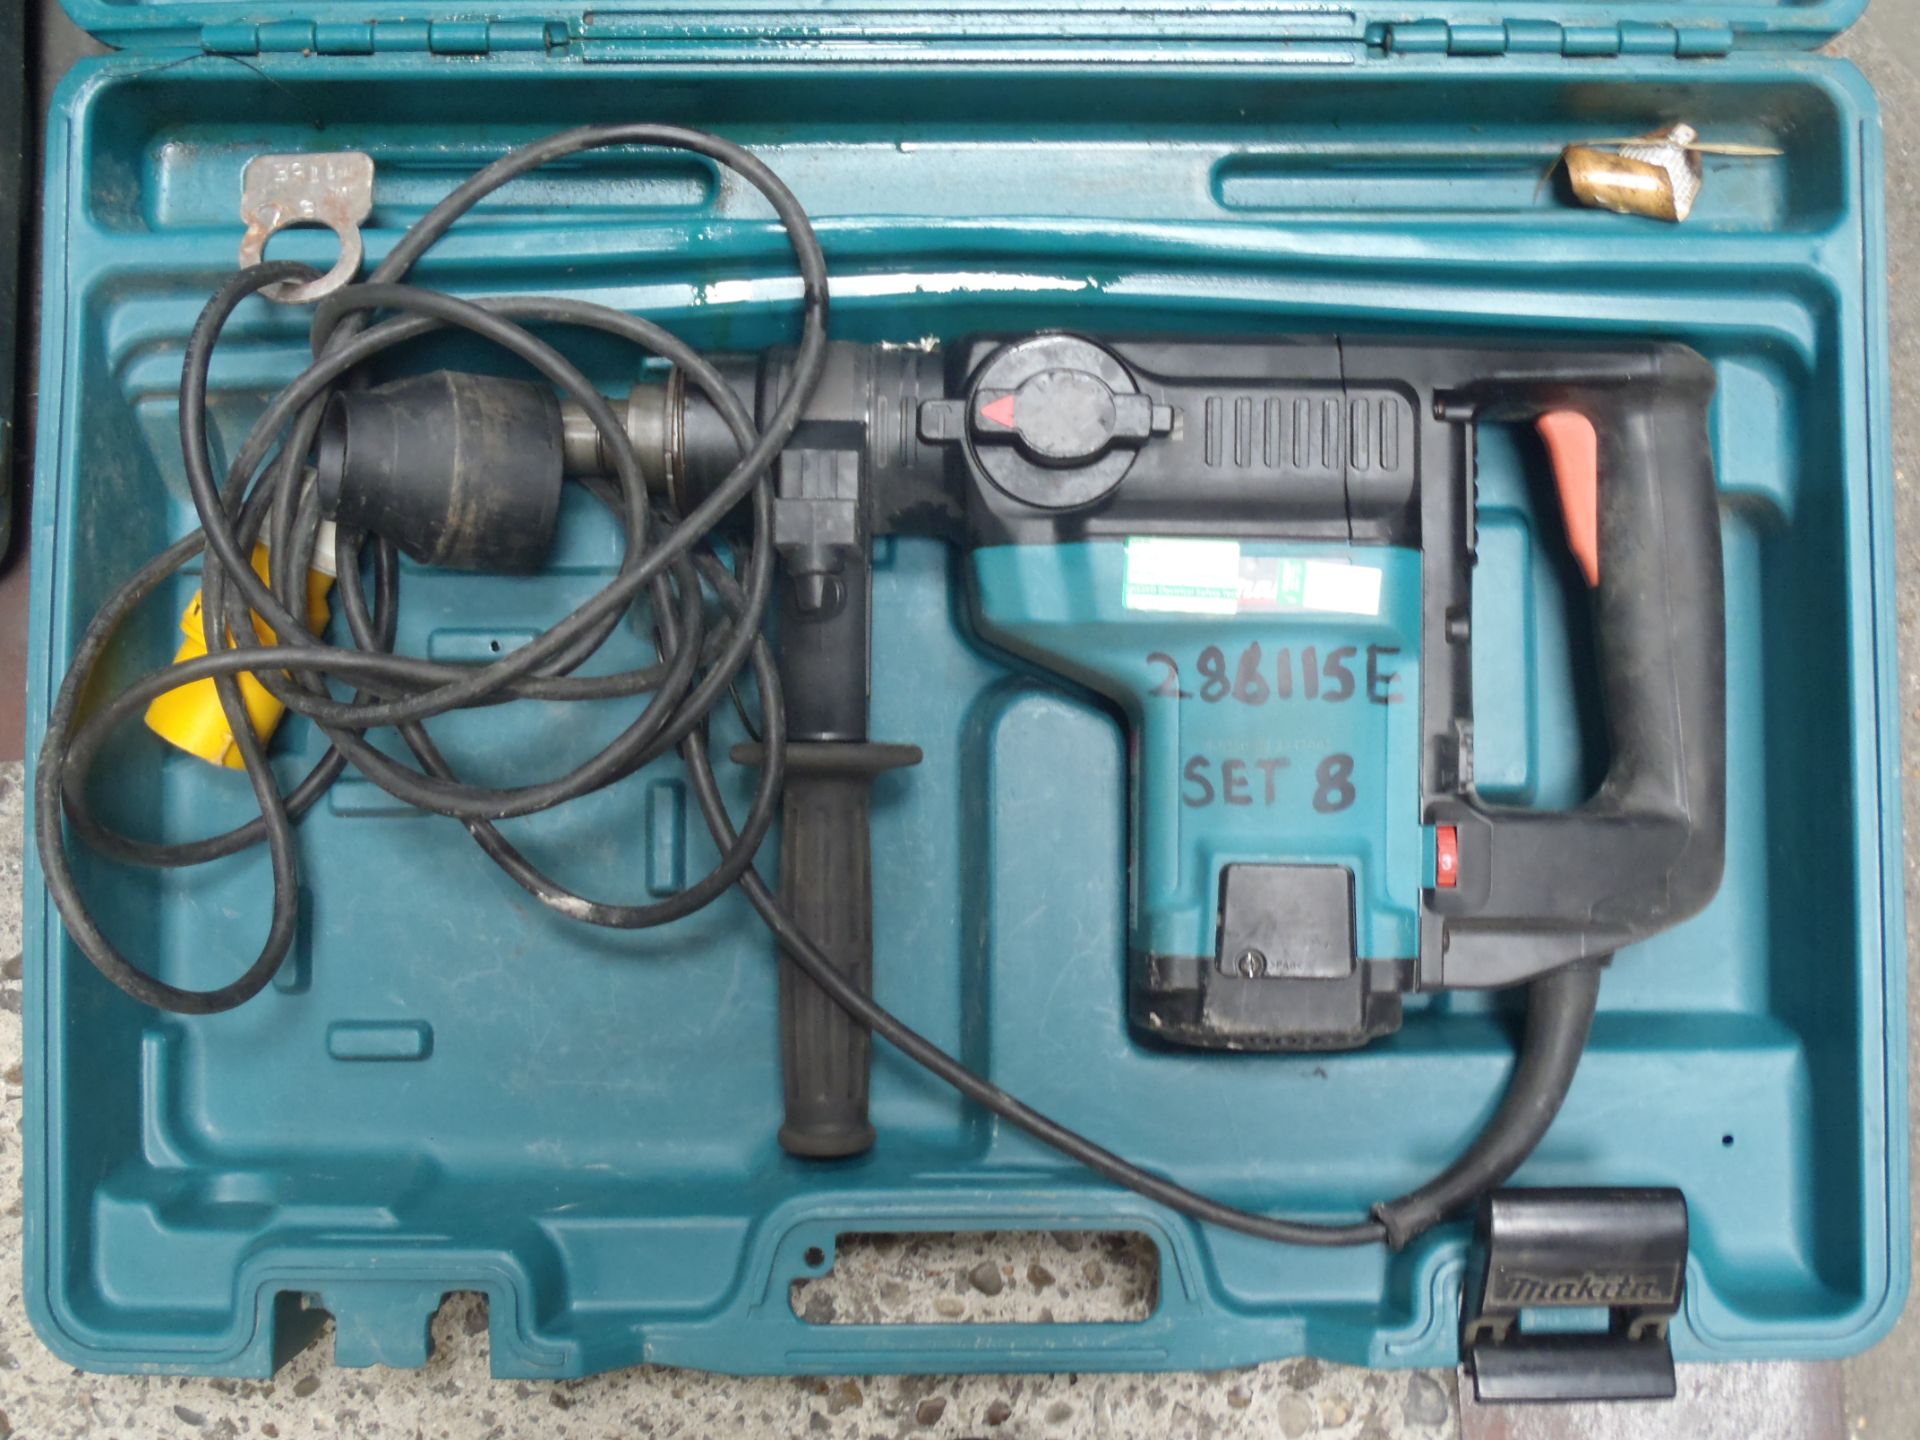 1x Makita Drill - Used Condition - Completely Untested